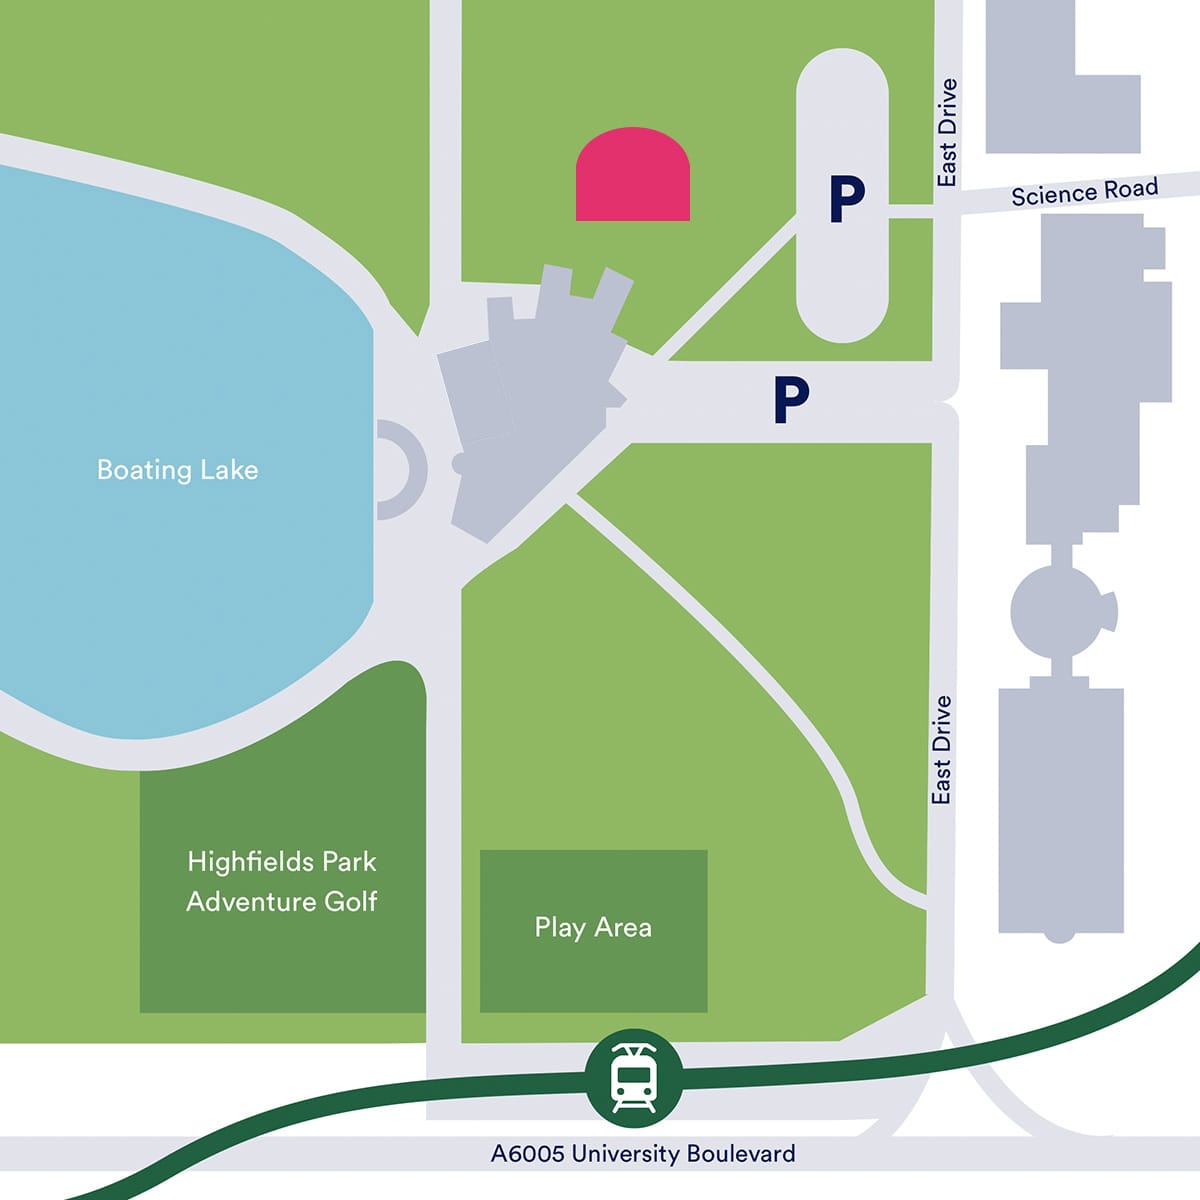 A map of Lakeside Arts highlighting the outdoor theatre space